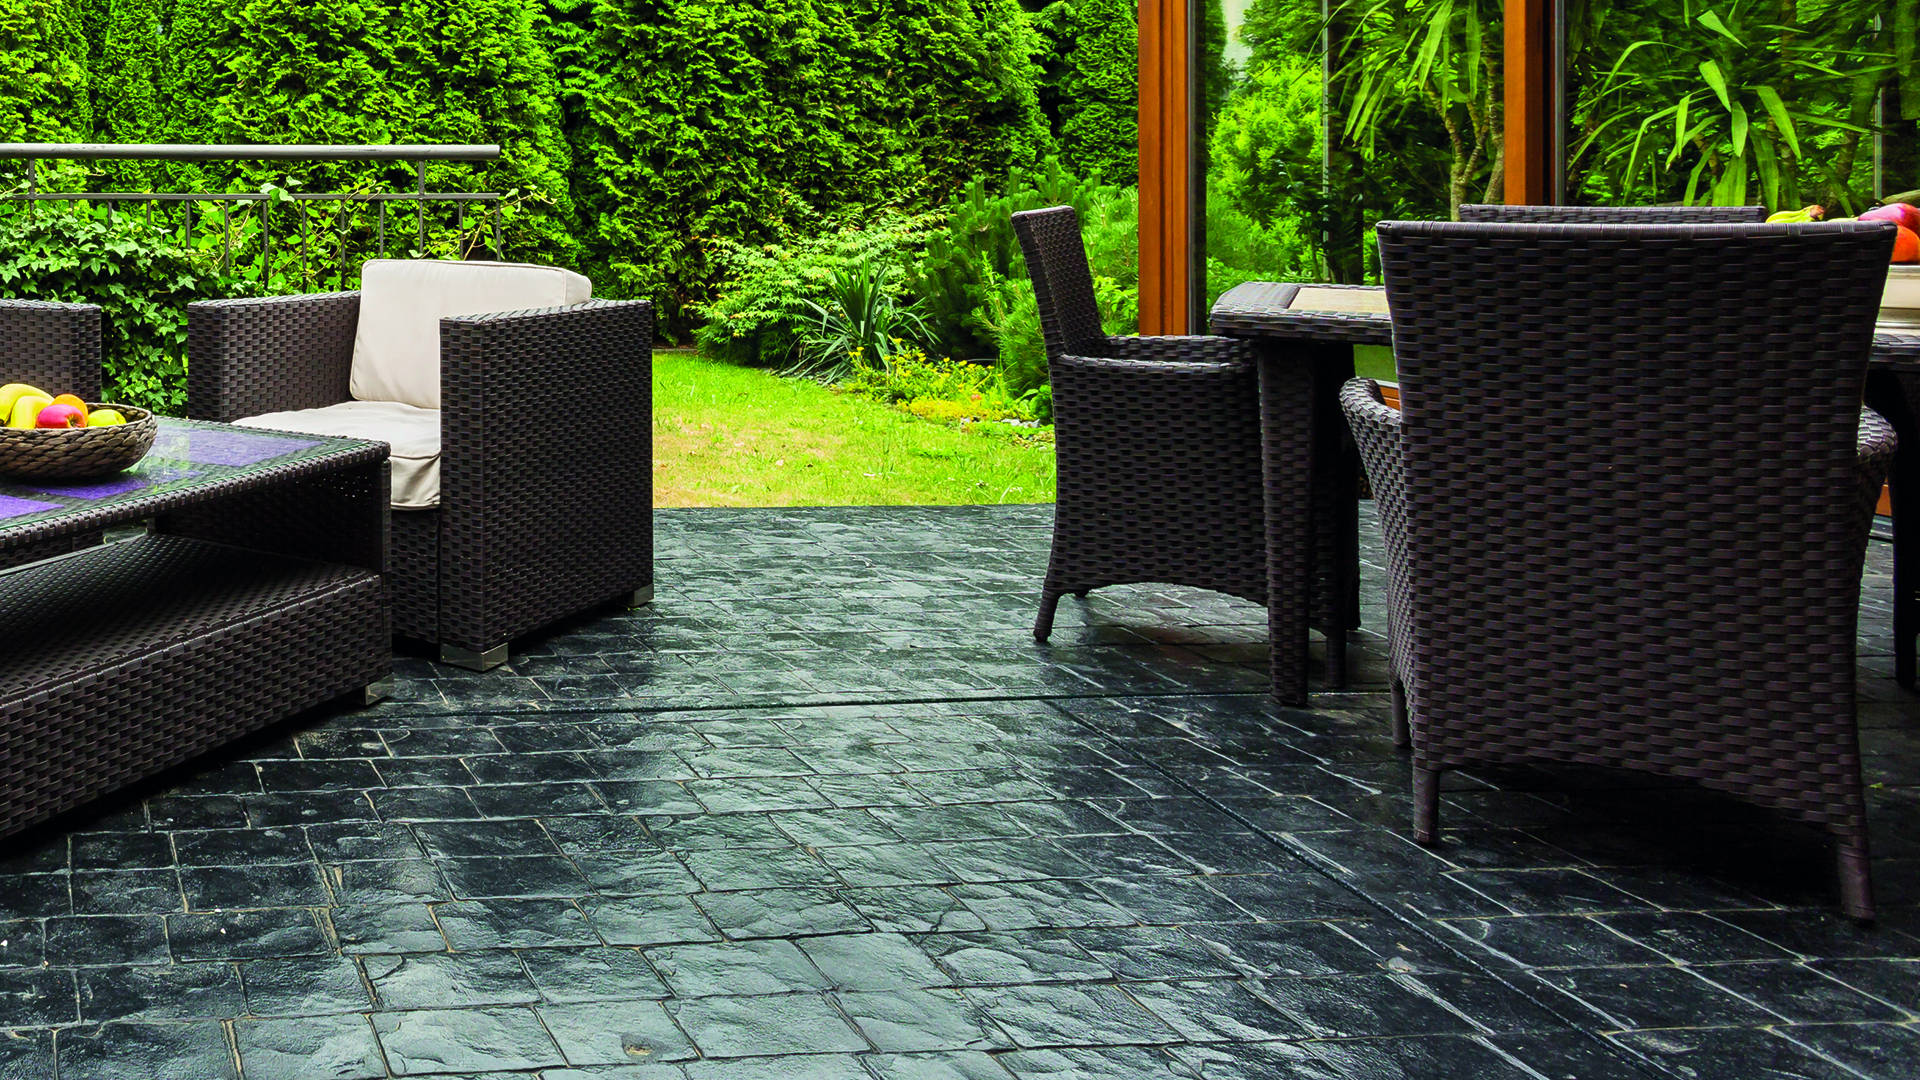  terrace with black stamped concrete floor